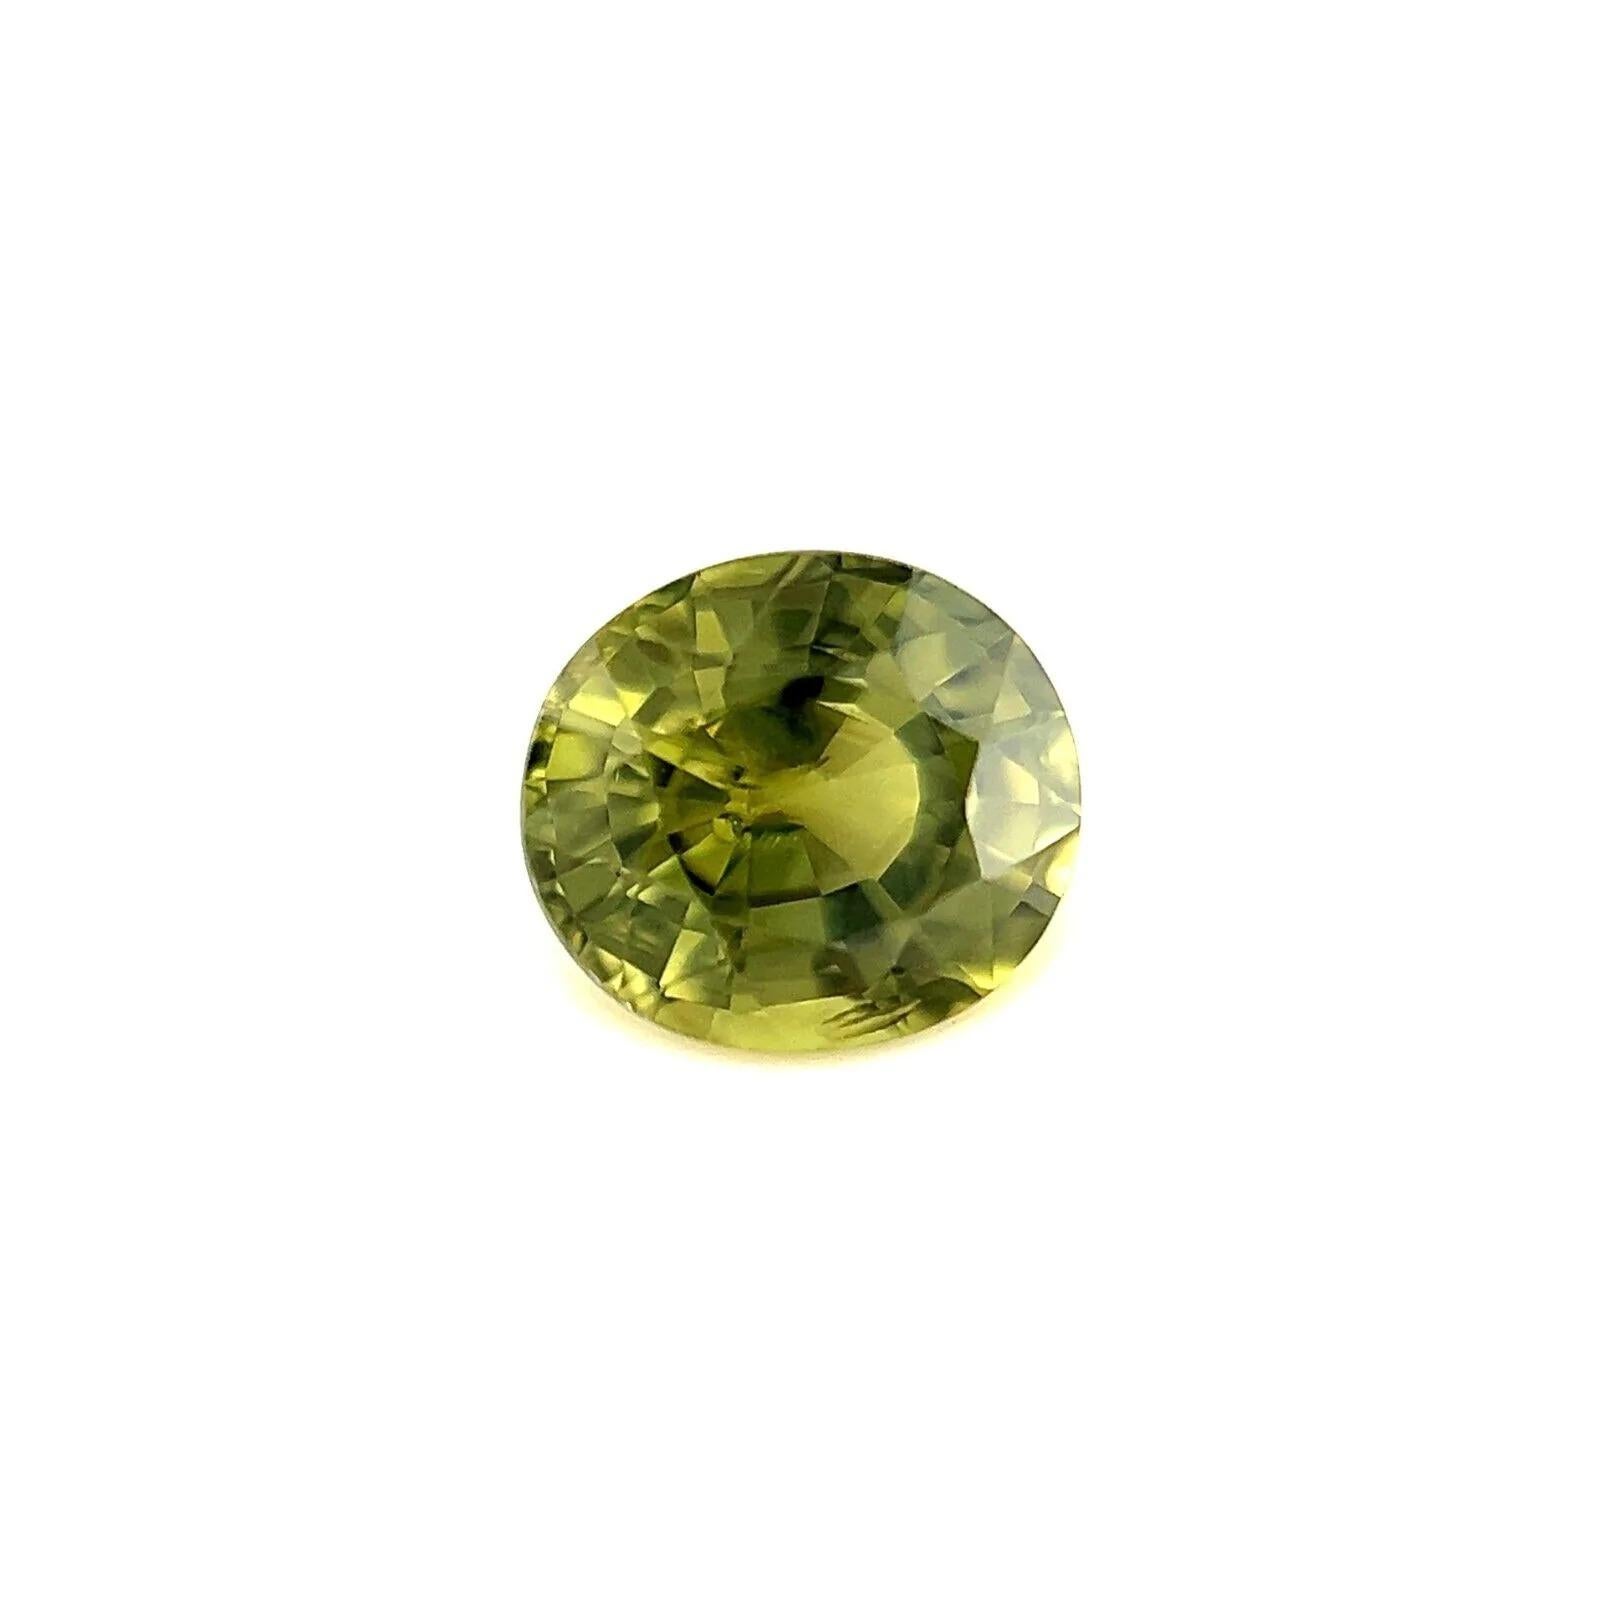 Unique Colour 0.95ct Rare Yellow Green Australian Sapphire Oval Cut 5.8x5.2mm

Fine Natural Yellow Green Sapphire Gemstone.
0.95 Carat with a unique vivid yellow green colour and good clarity, a very clean stone. Also has an excellent oval cut and